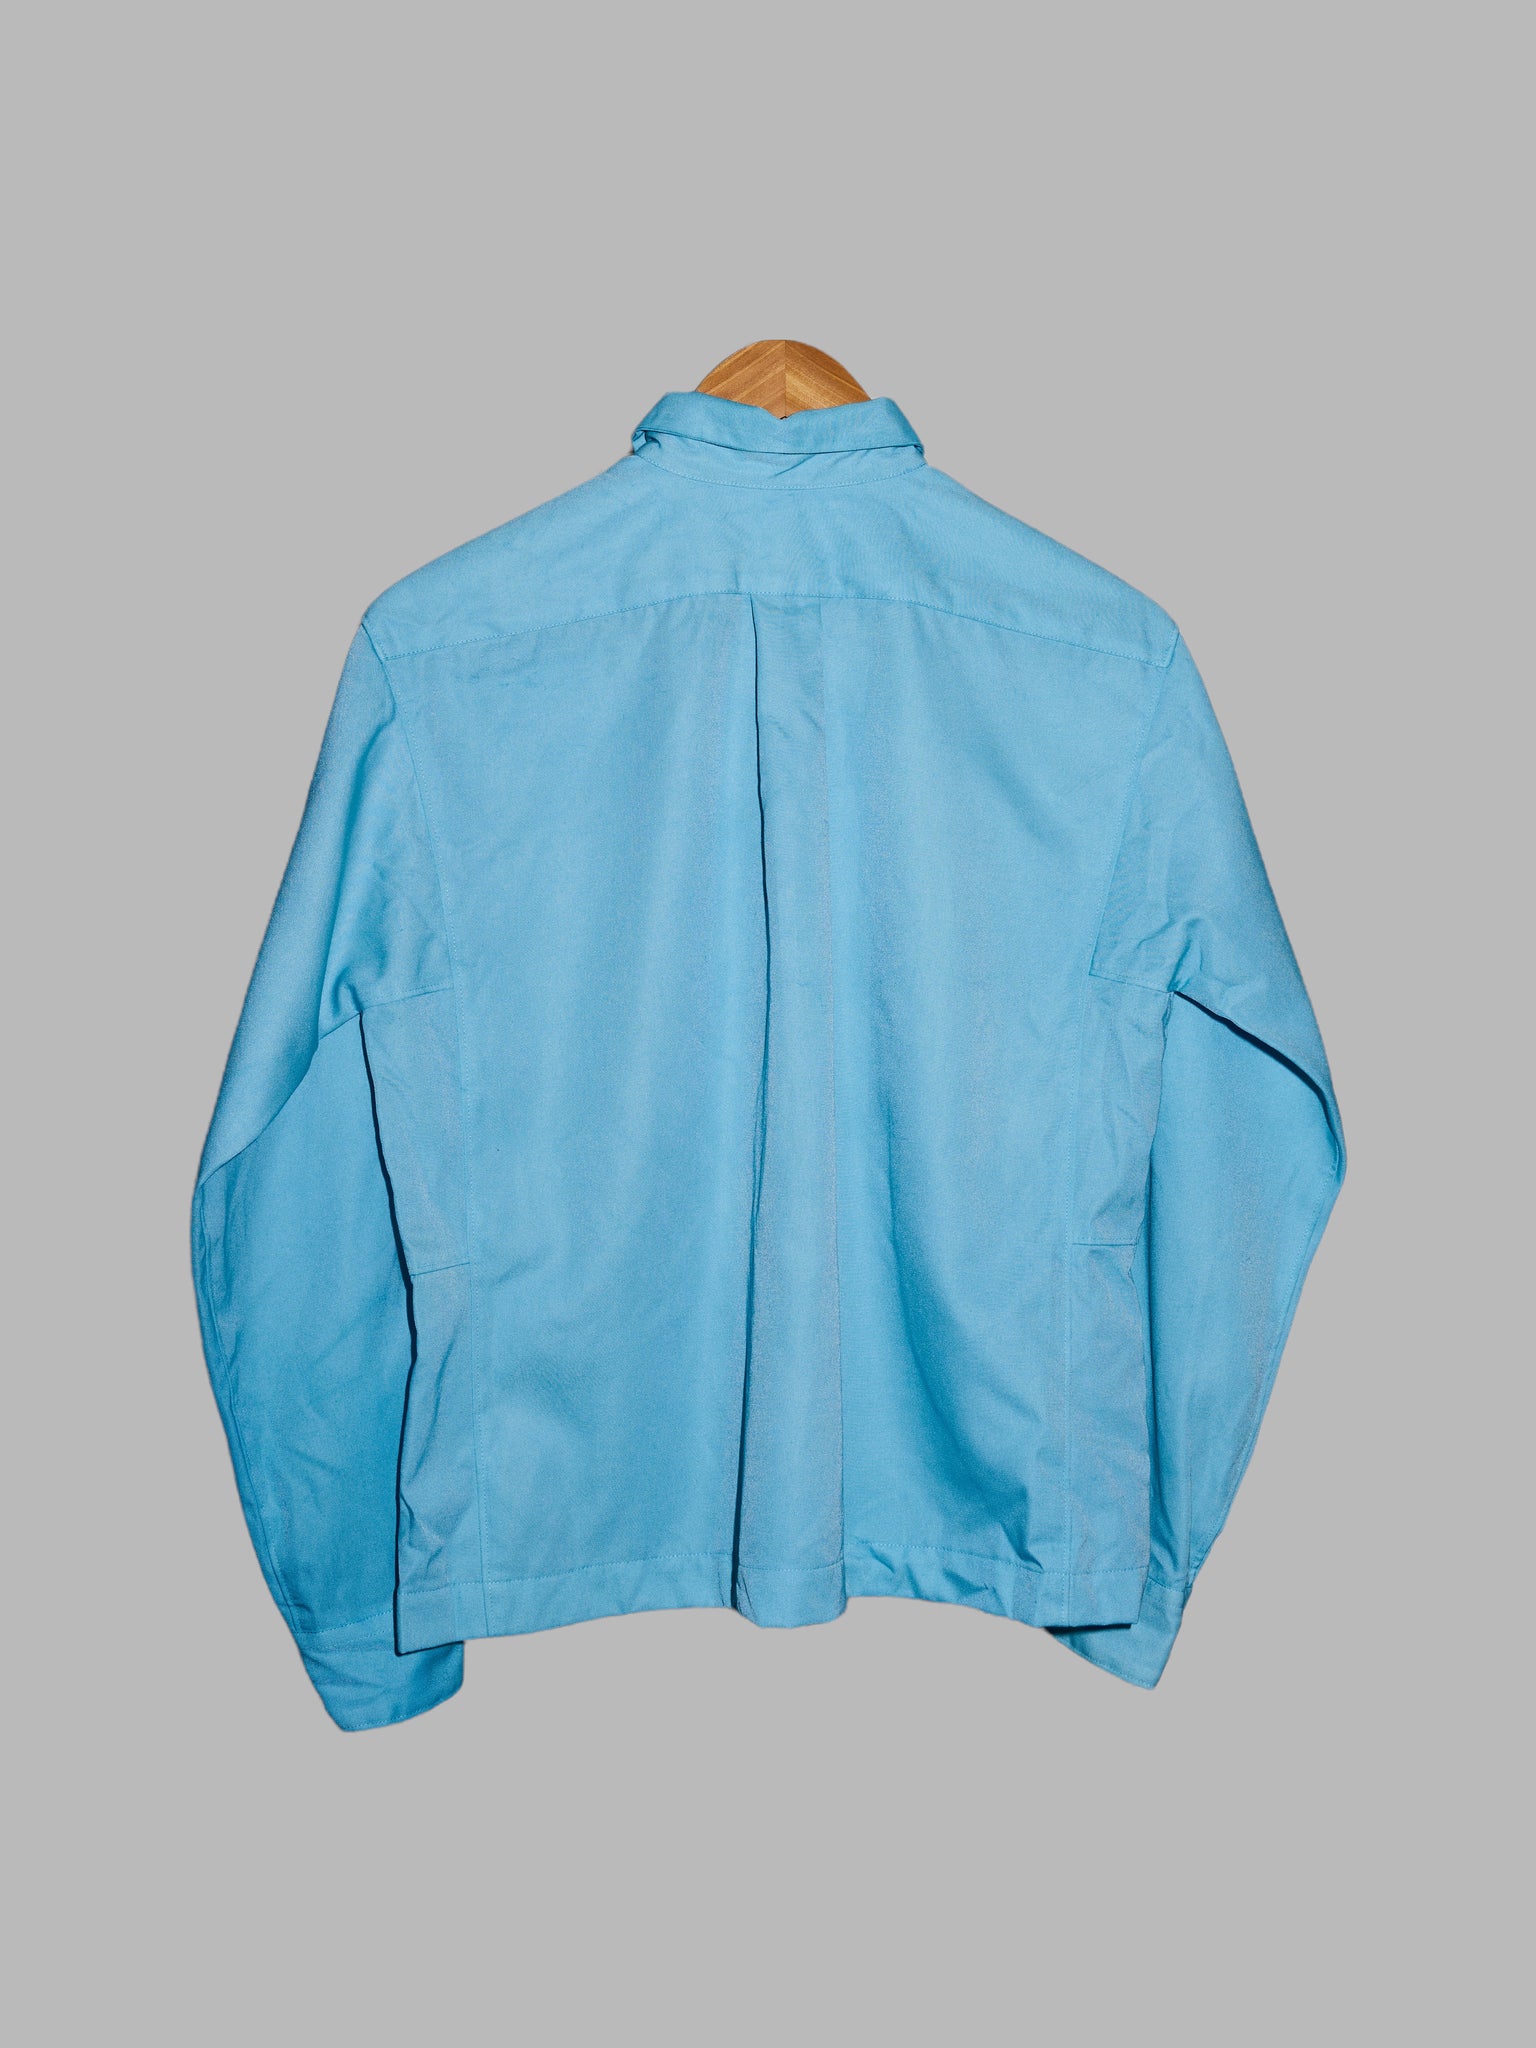 Comme des Garcons AW1995 "Sweeter than Sweet" blue pullover shirt